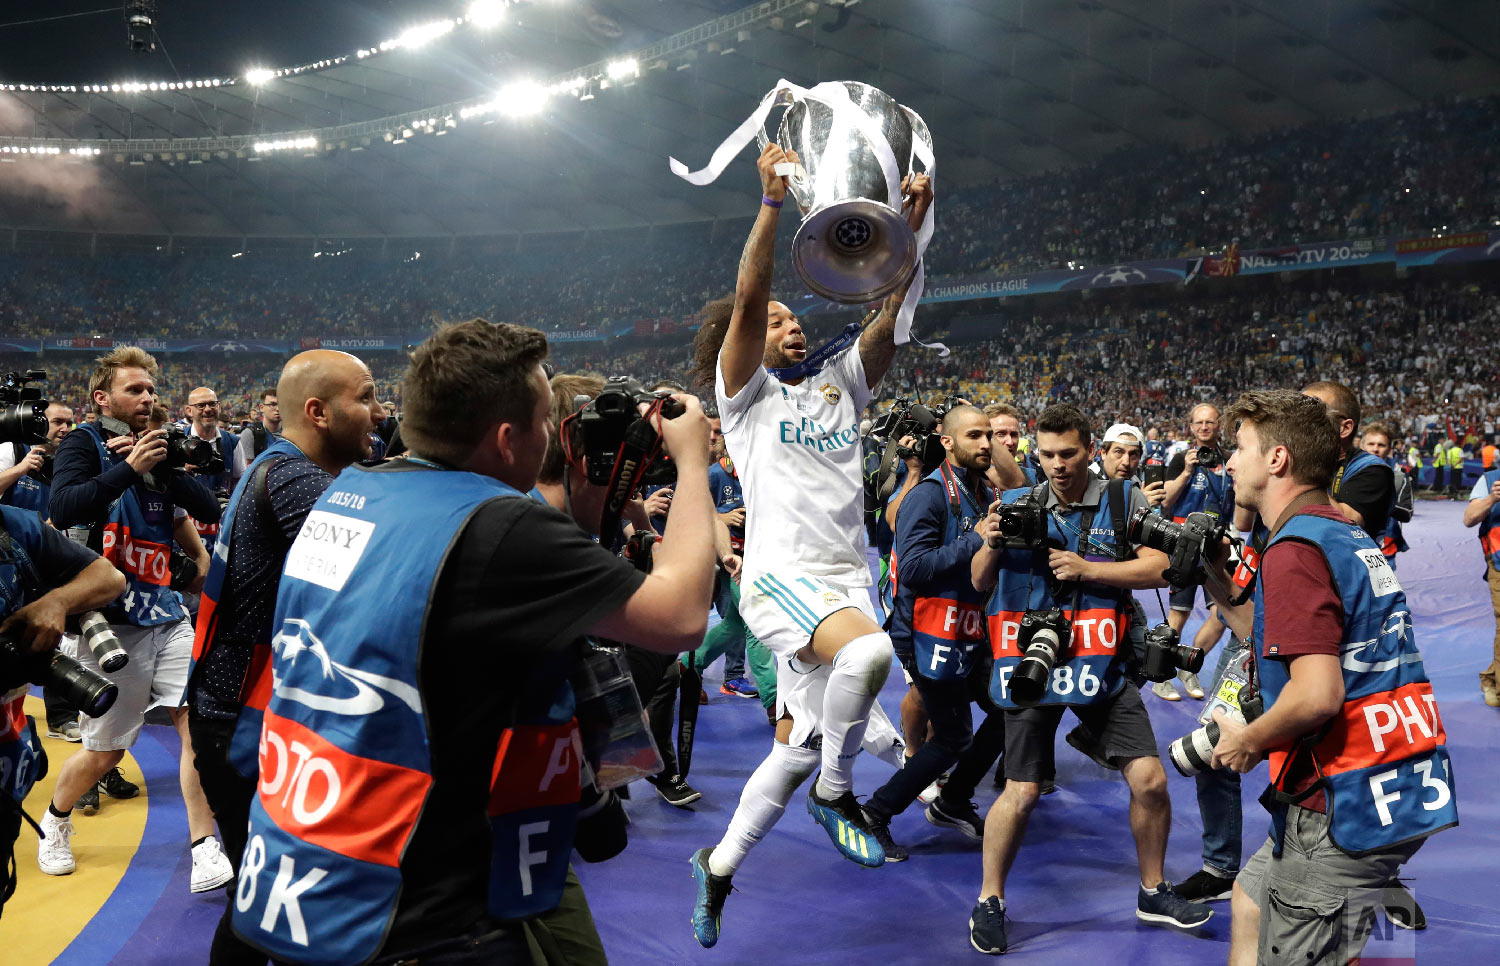  Real Madrid's Marcelo celebrates with the trophy after winning the Champions League Final soccer match against Liverpool at the Olimpiyskiy Stadium in Kiev, Ukraine, on May 26, 2018. (AP Photo/Matthias Schrader) 